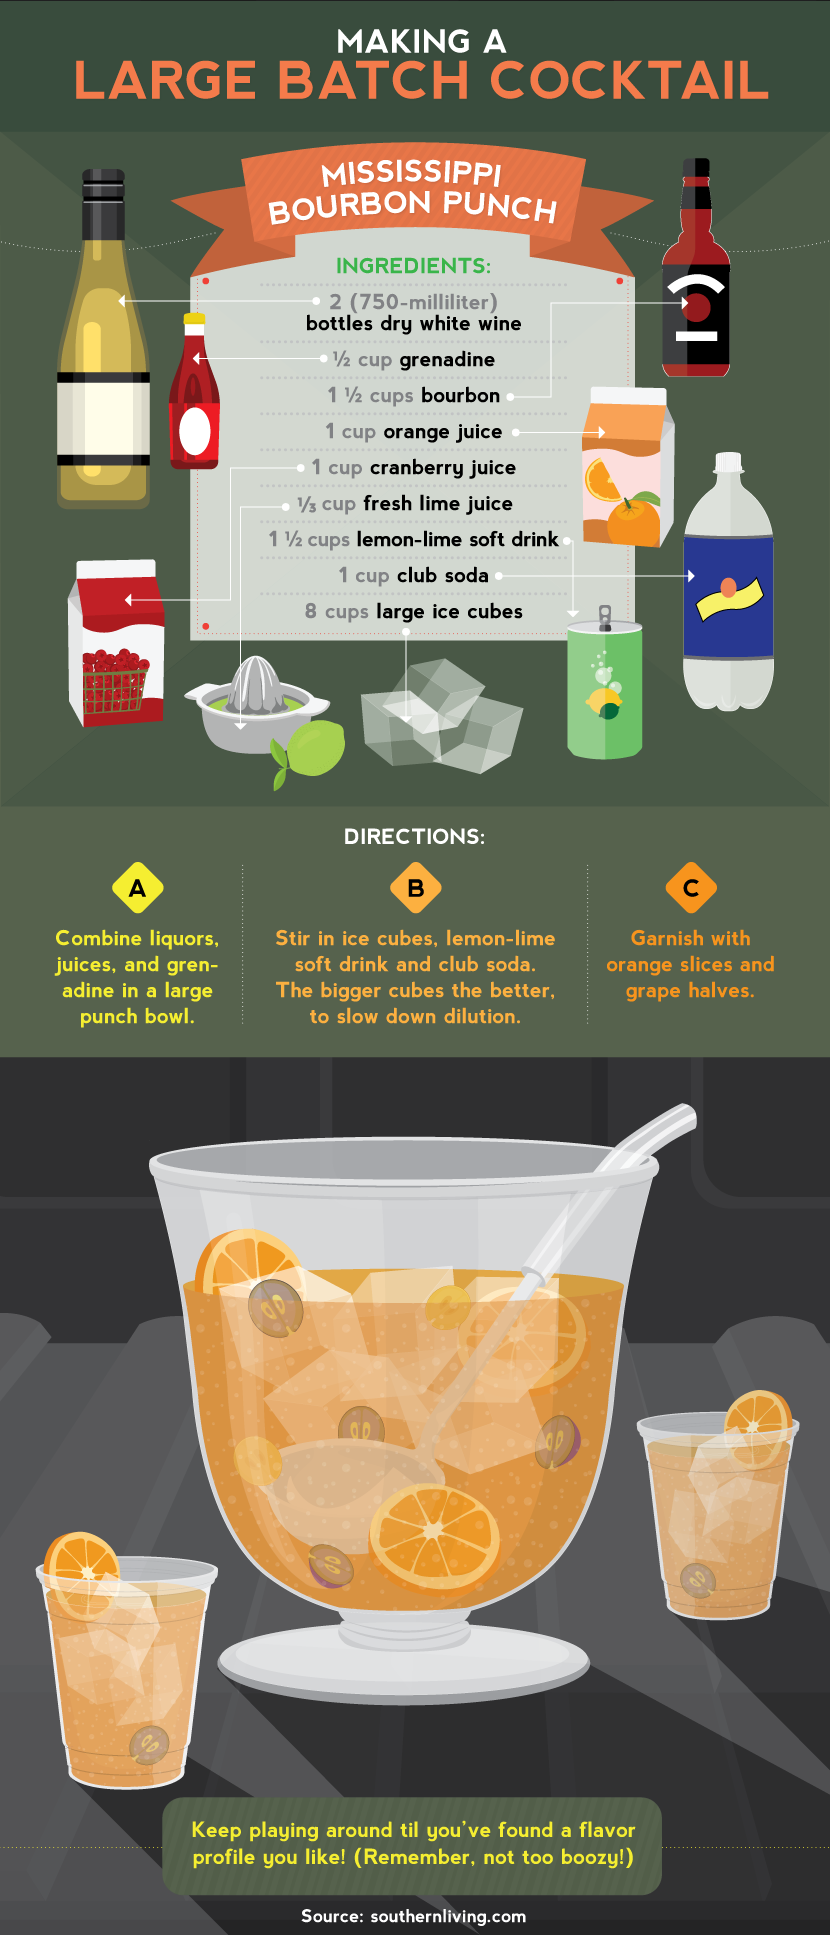 Make a Large Batch Cocktail - How to Make Cocktails for a Tailgate